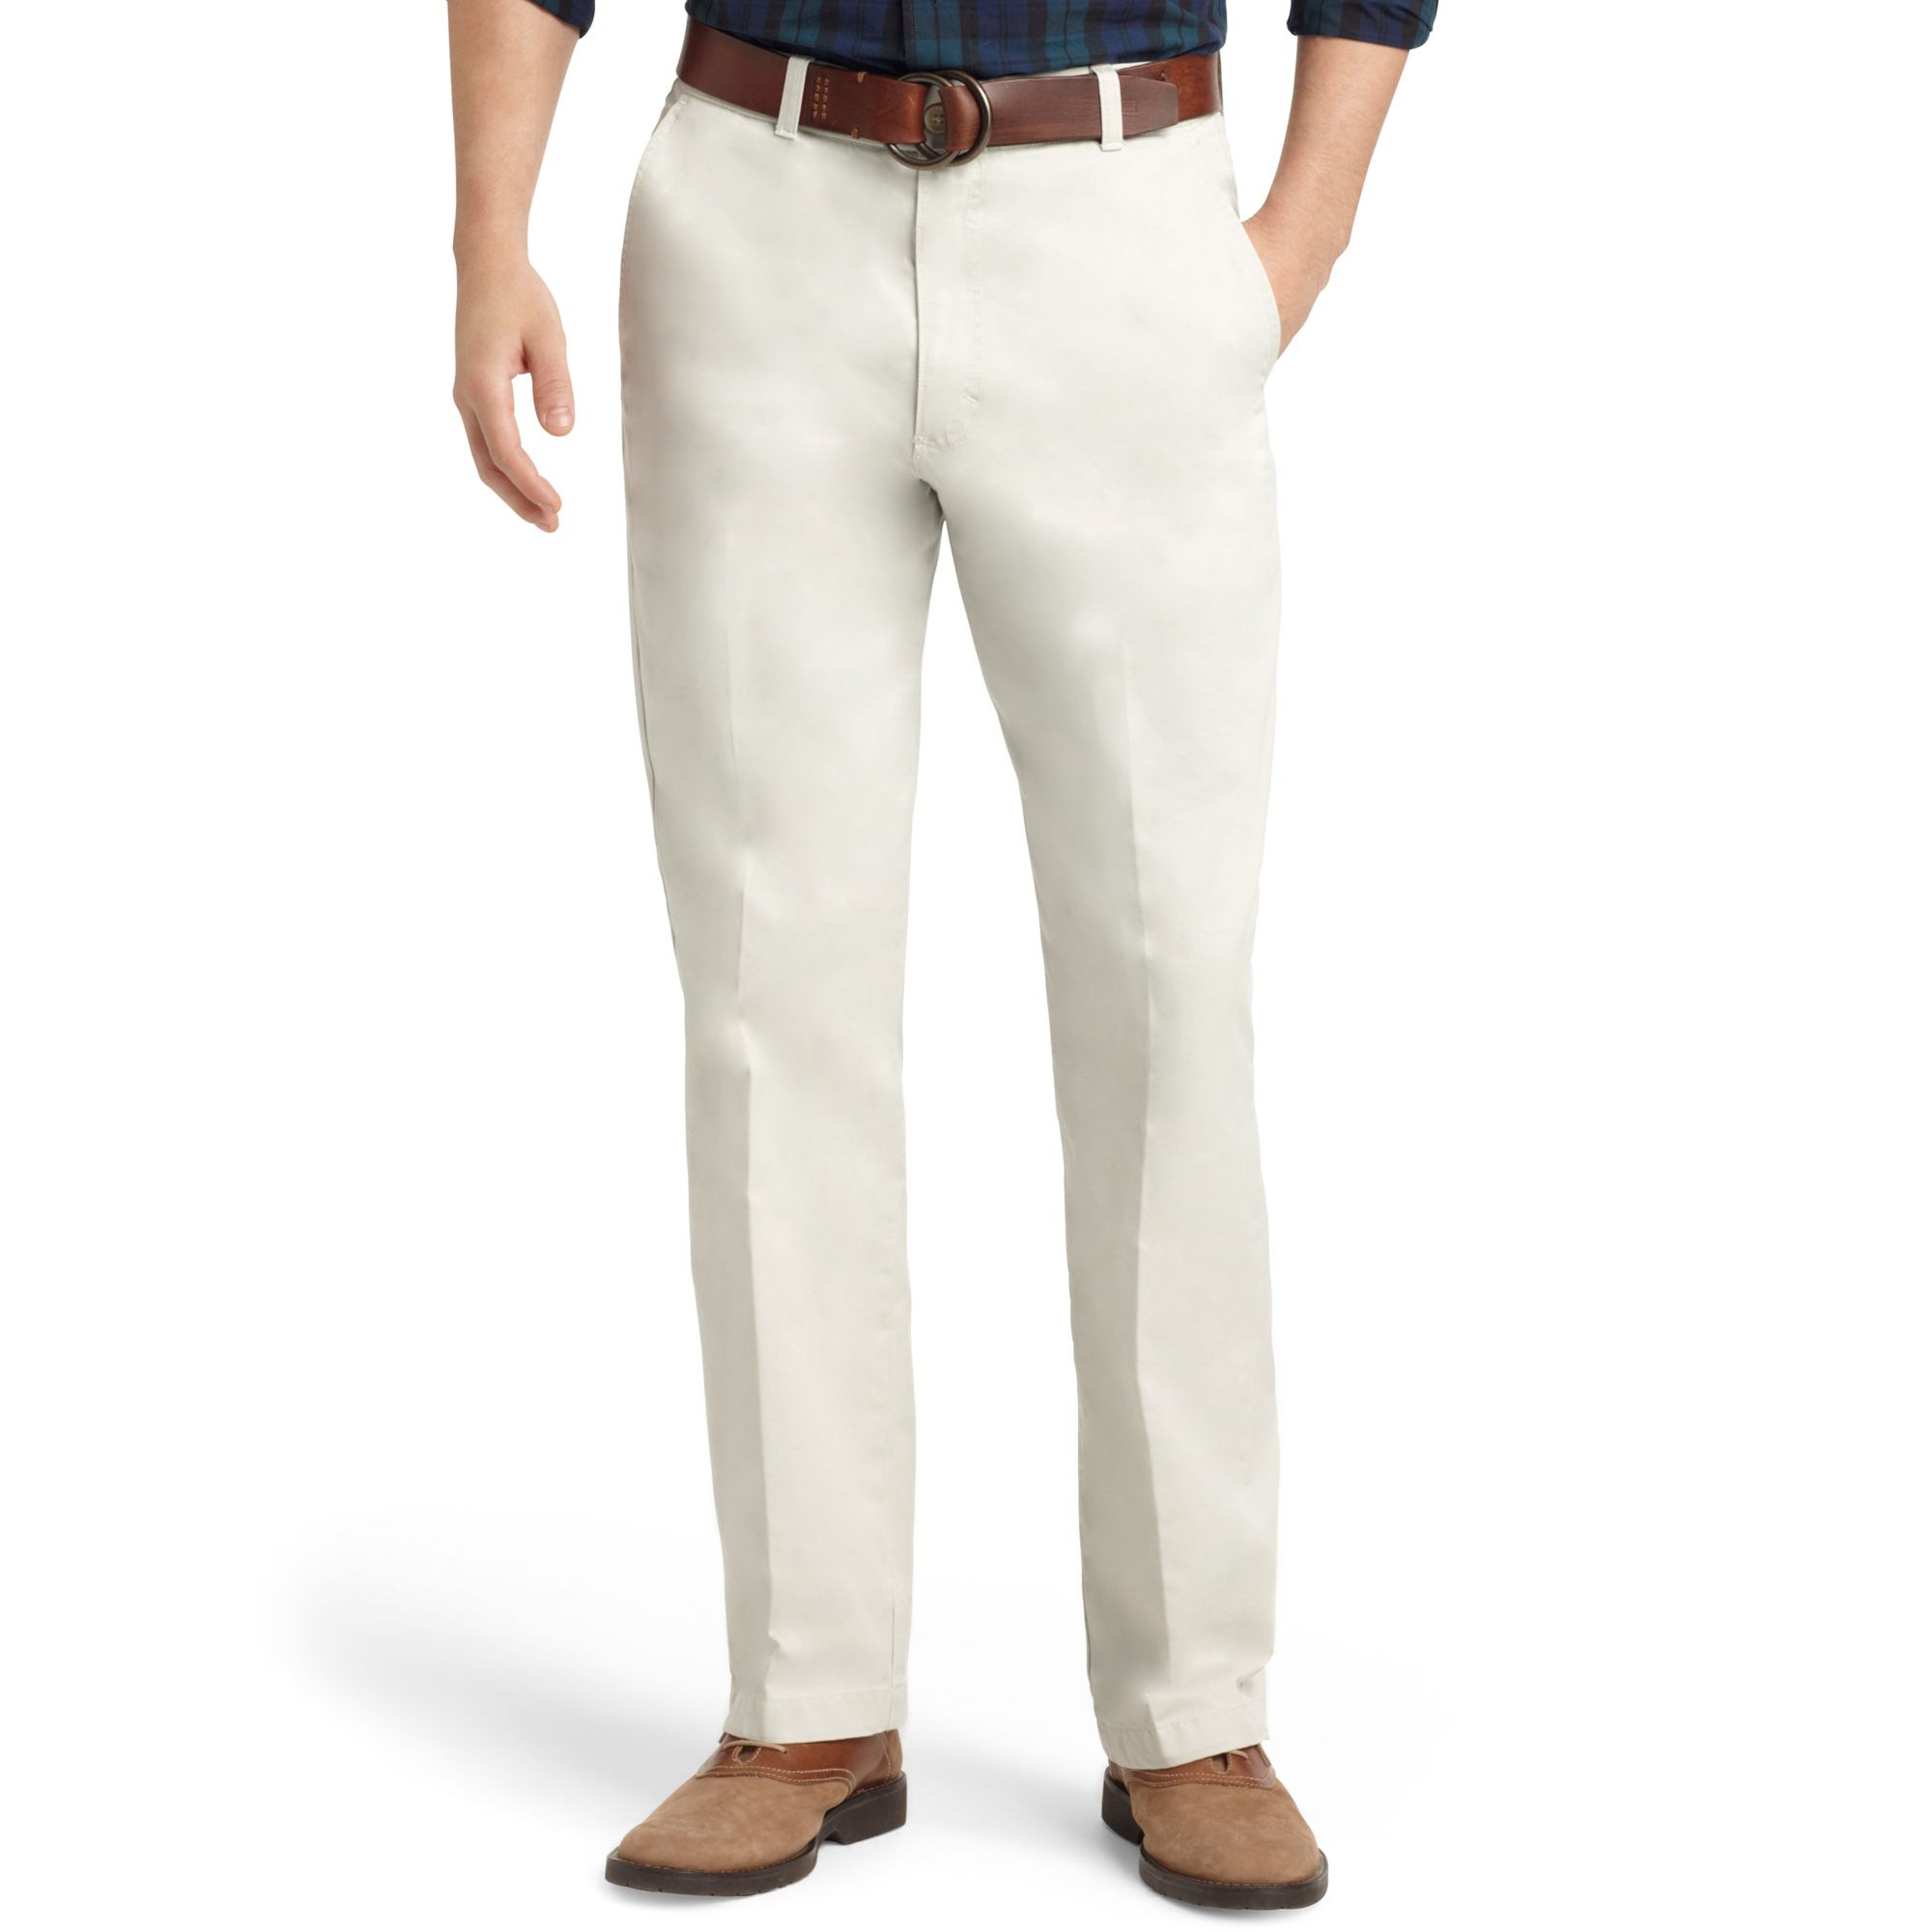 Lyst - Izod Saltwater Straight Fit Chino Pants in White for Men